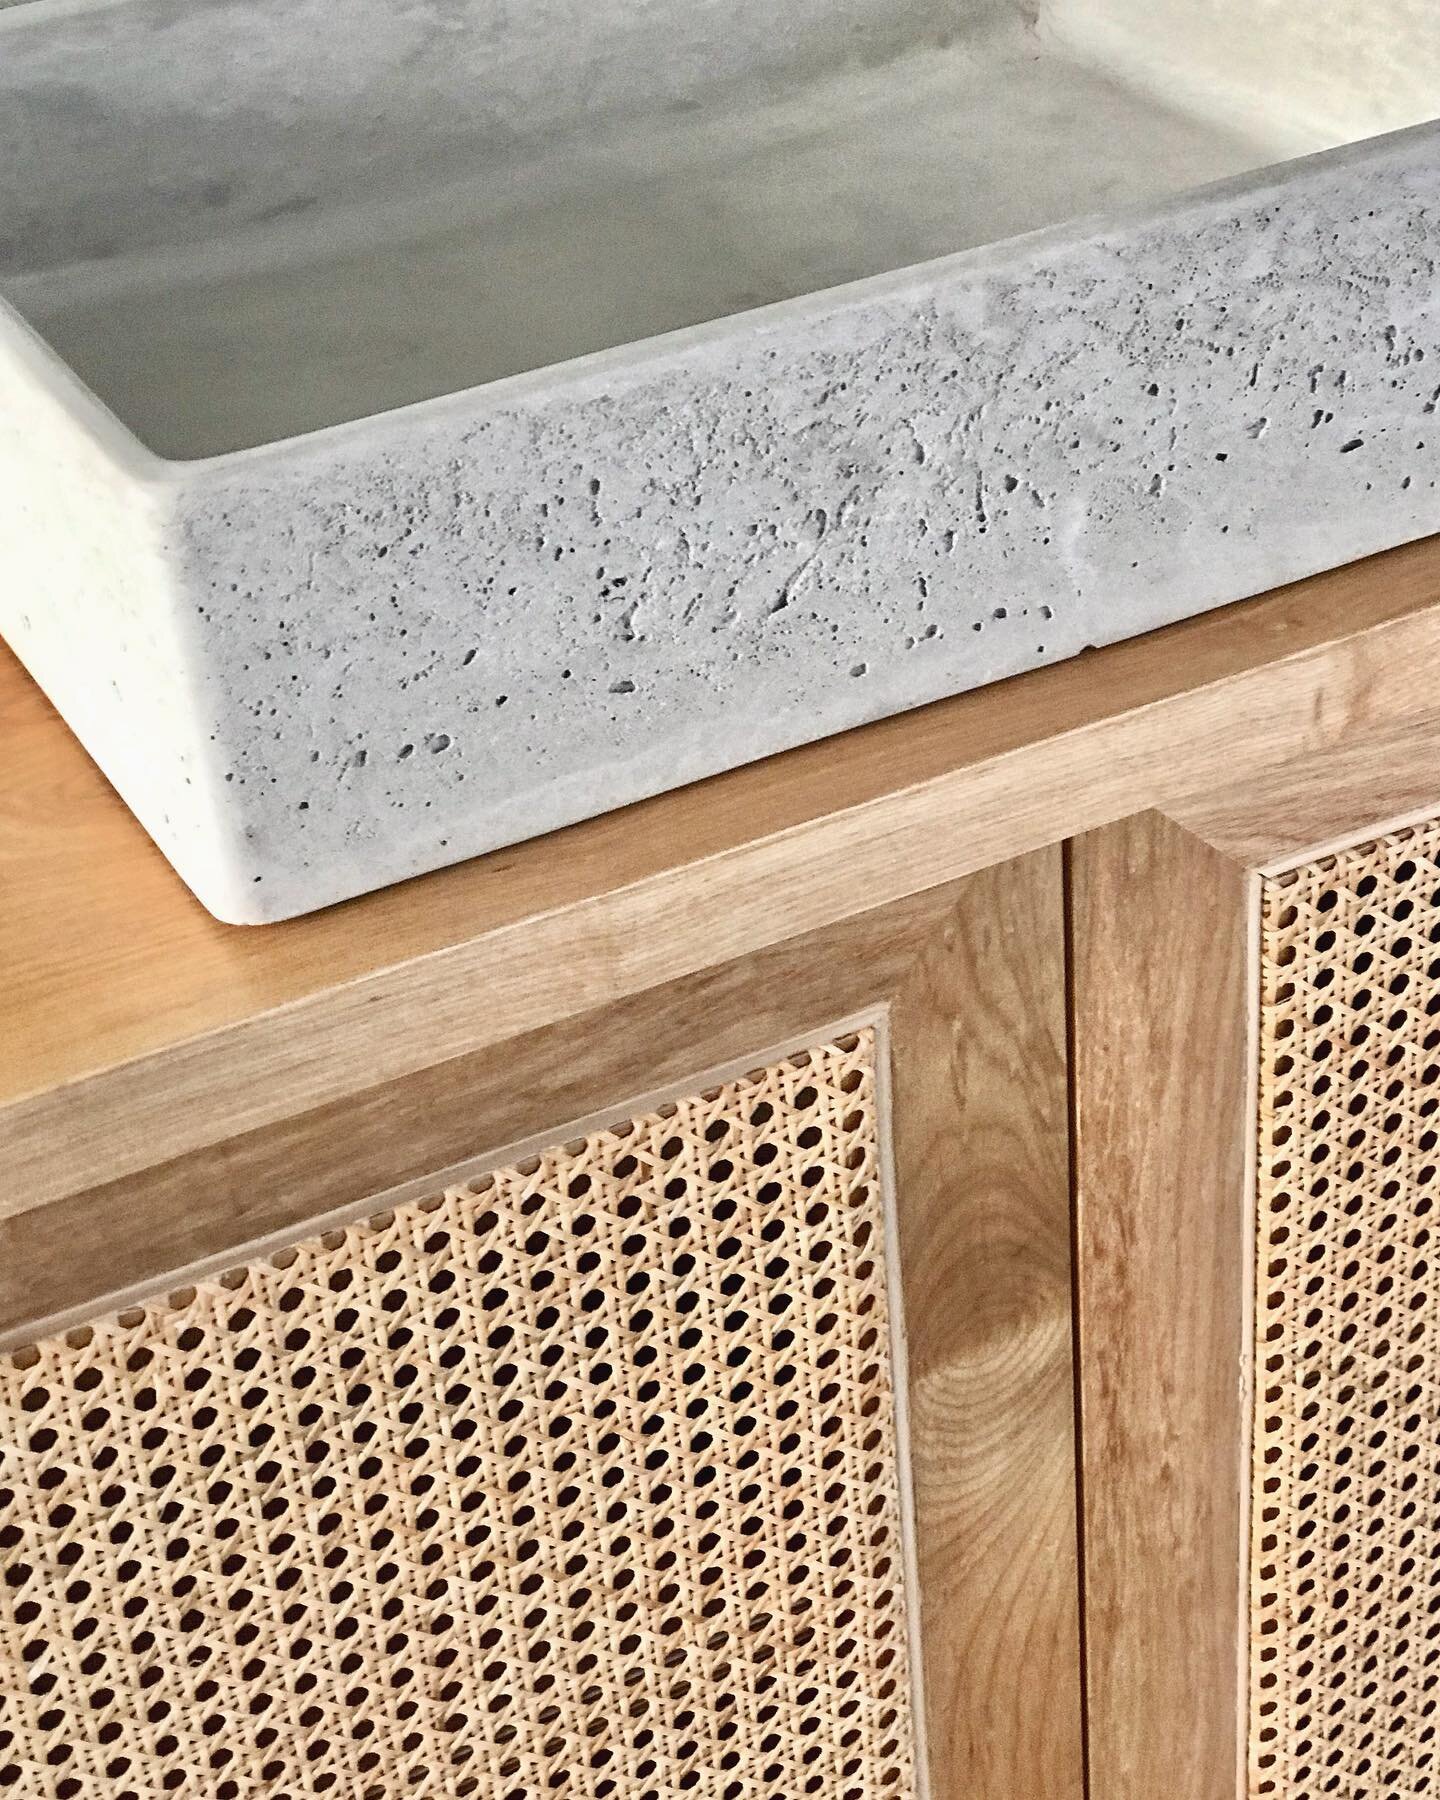 Tawa Love ❤️ 

This native NZ timber is so beautiful in grain and colour. It could easily become one of our favourite timbers. 

Paired with one of Andrews's textured concrete basins it has a warm and natural aesthetic 🧡

This new design is quite ve